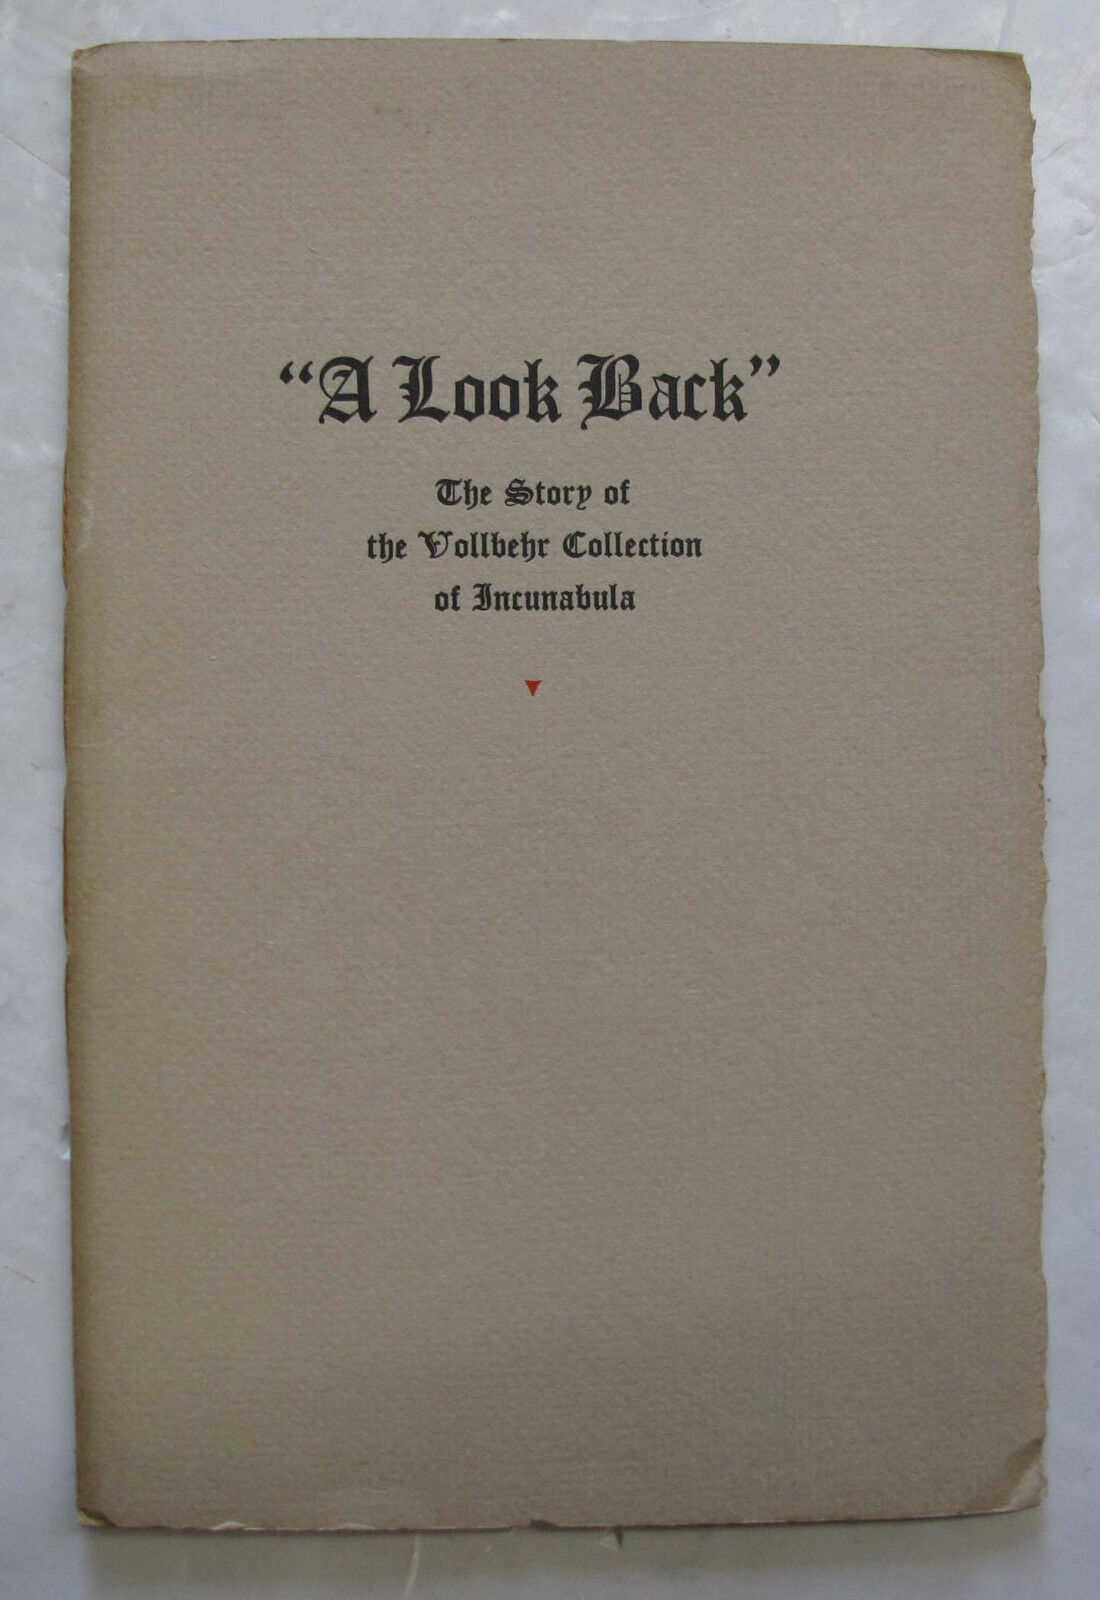 Antique Rare Books Printing A Look Back Vollbehr Collection Incunabula Aiga 1934